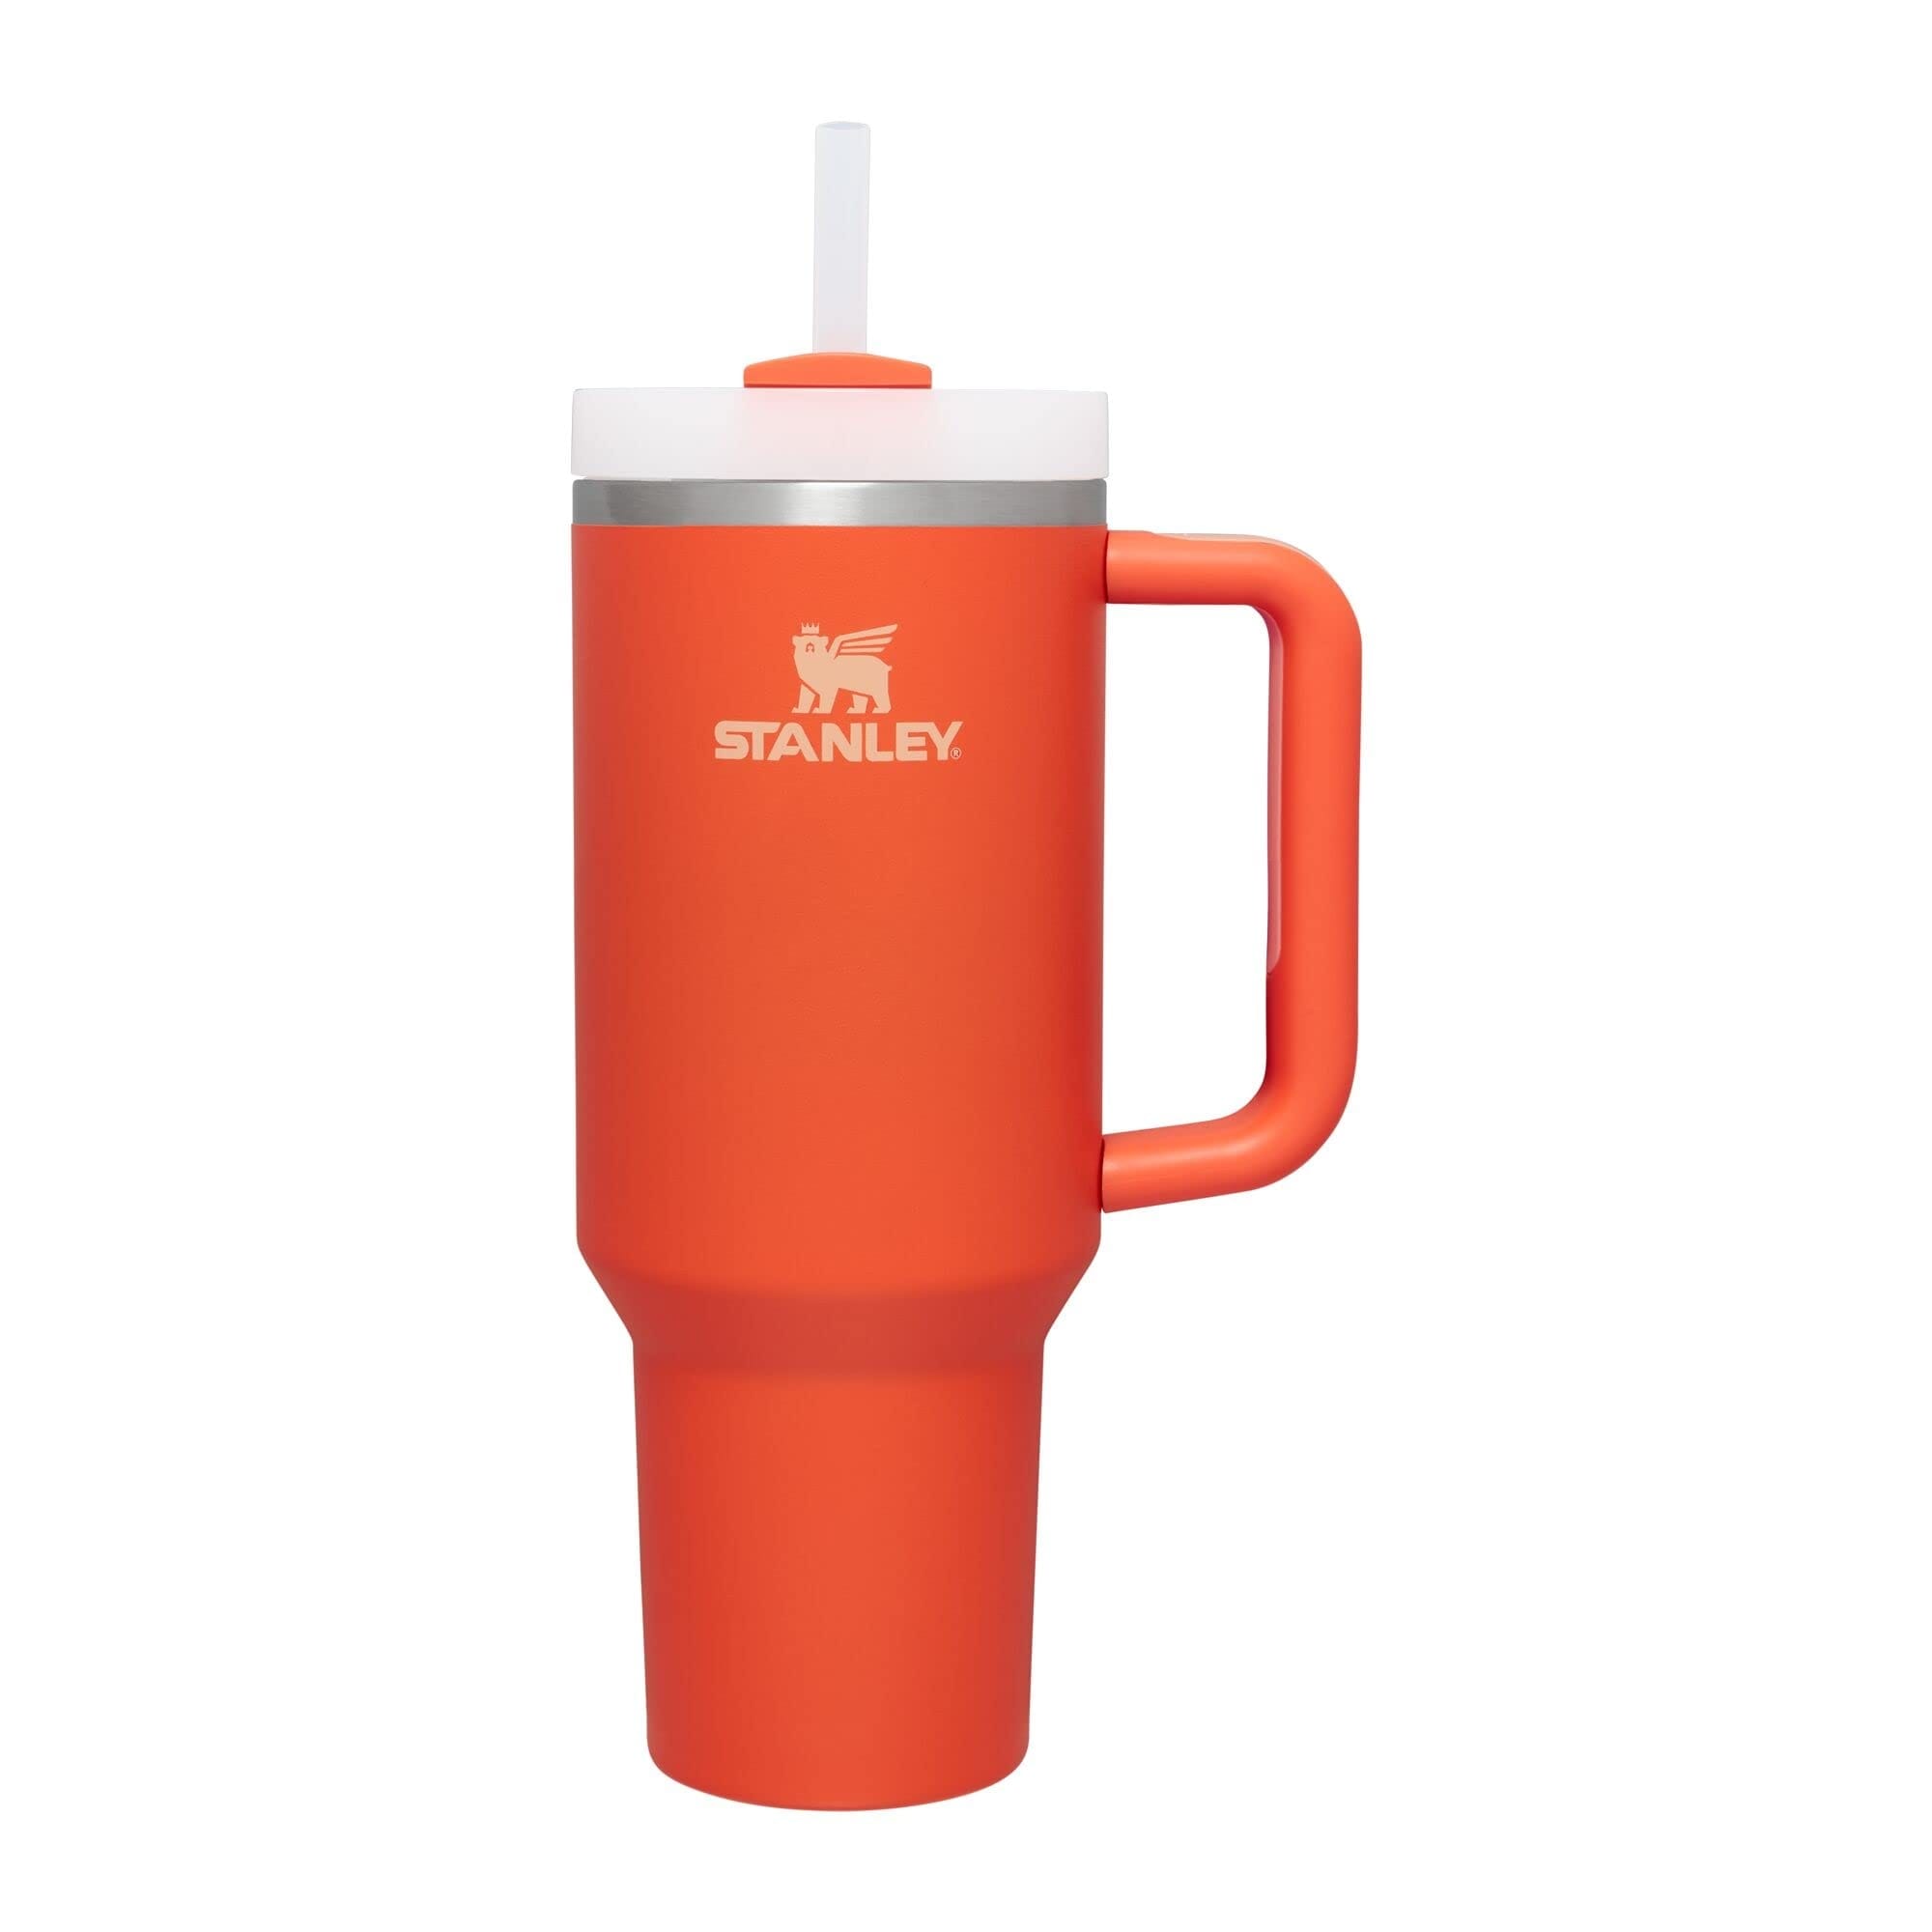 https://ak1.ostkcdn.com/images/products/is/images/direct/38671dafbeb6e9d0e7fc456634744ec3839ca176/Quencher-H2.0-FlowState-Stainless-Steel-Vacuum-Insulated-Tumbler-with-Lid-and-Straw-for-Water%2C-Iced-Tea-or-Coffee.jpg